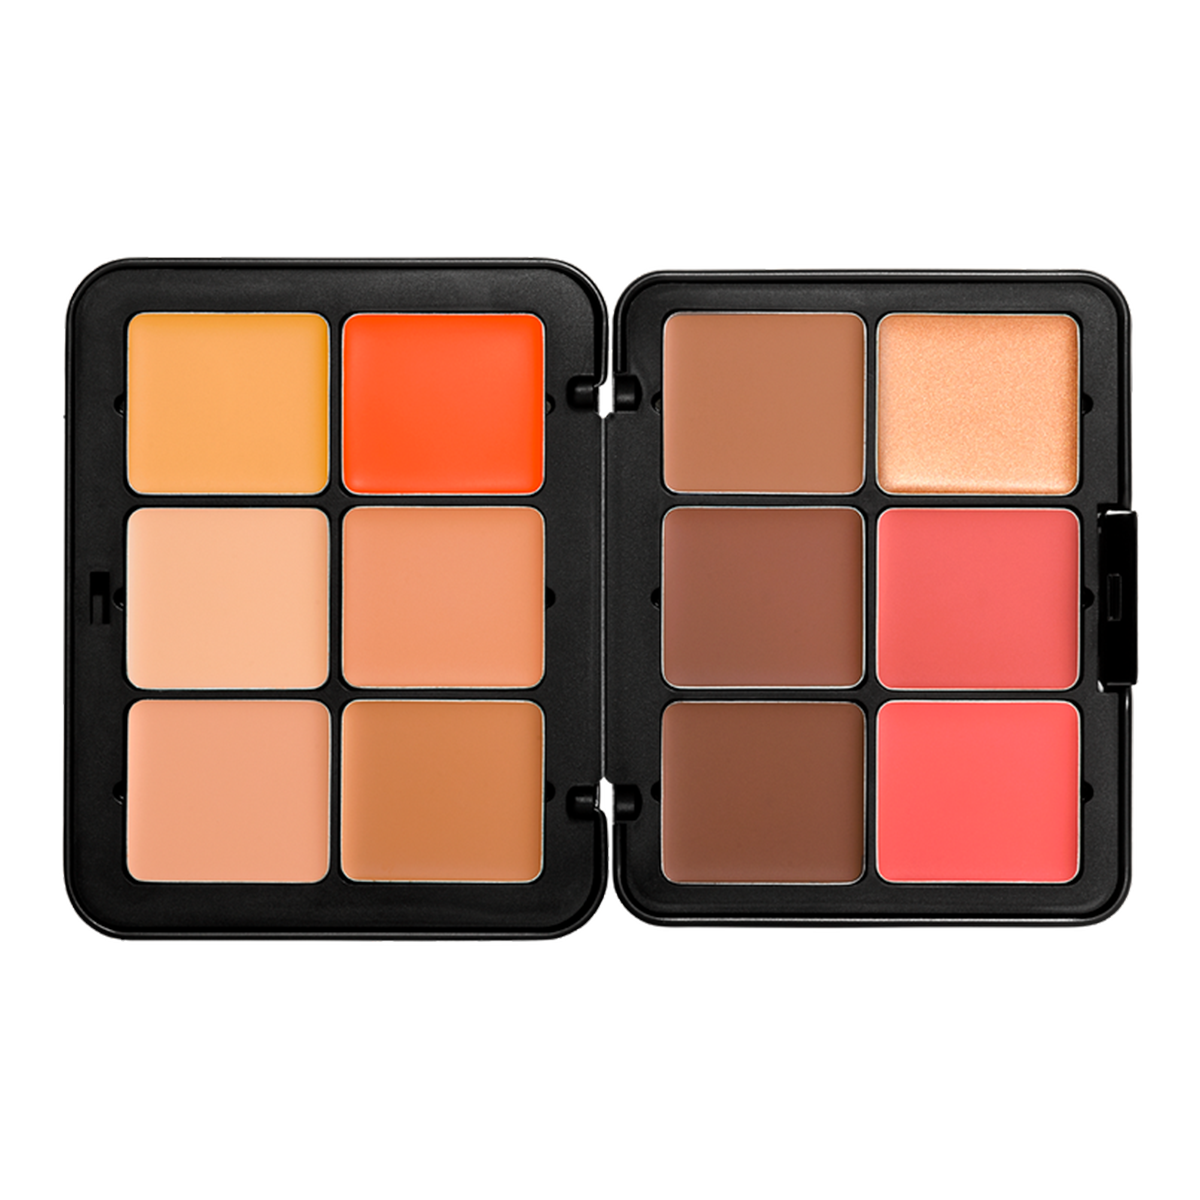 Skin All-in-one Face Palette - Harmony 2